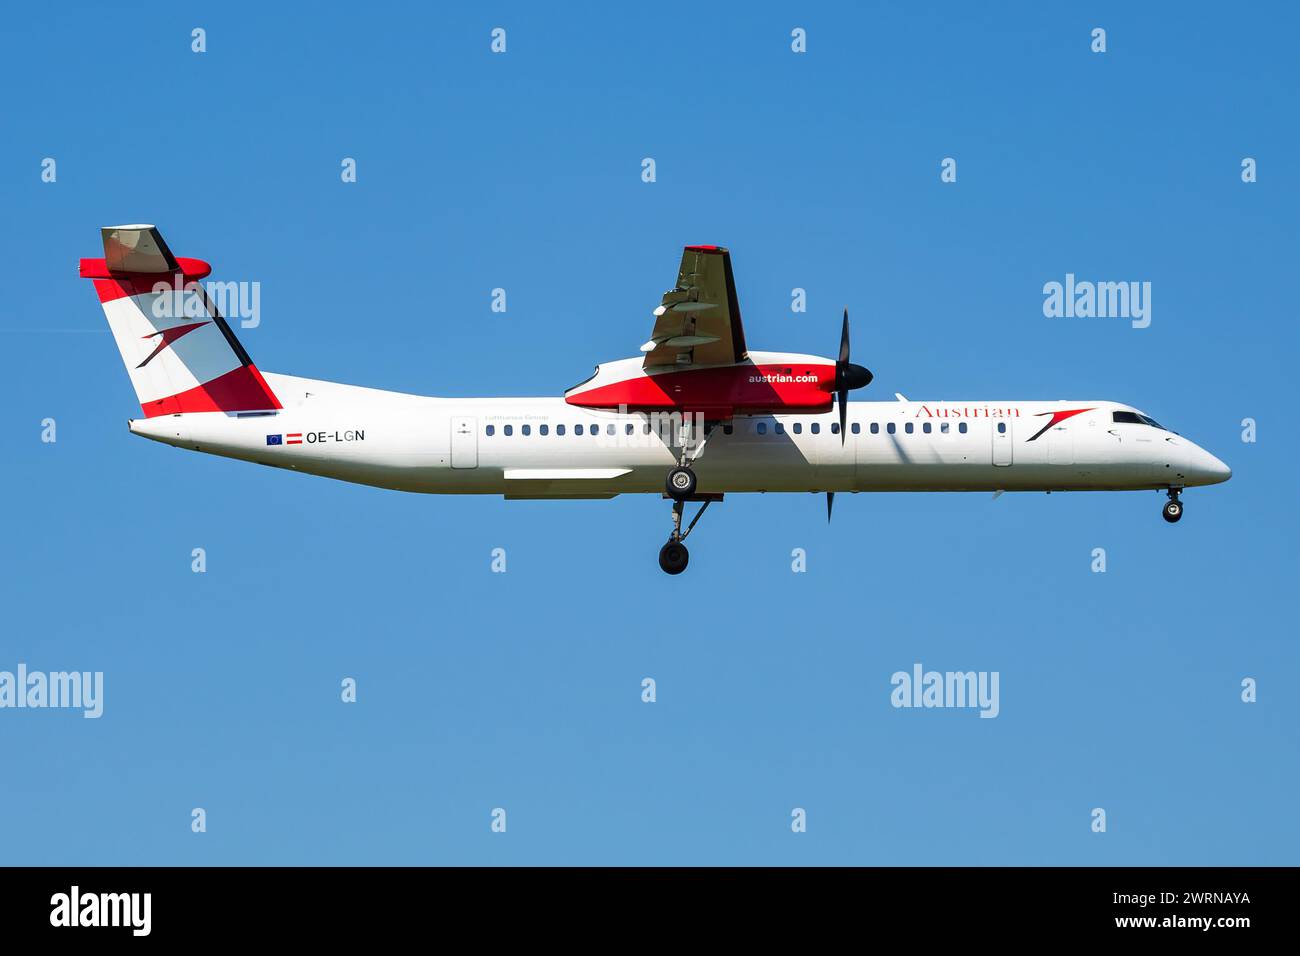 Vienna, Austria - May 13, 2018: Austrian Airlines Bombardier DHC-8 Q400 OE-LGN passenger plane arrival and landing at Vienna Airport Stock Photo